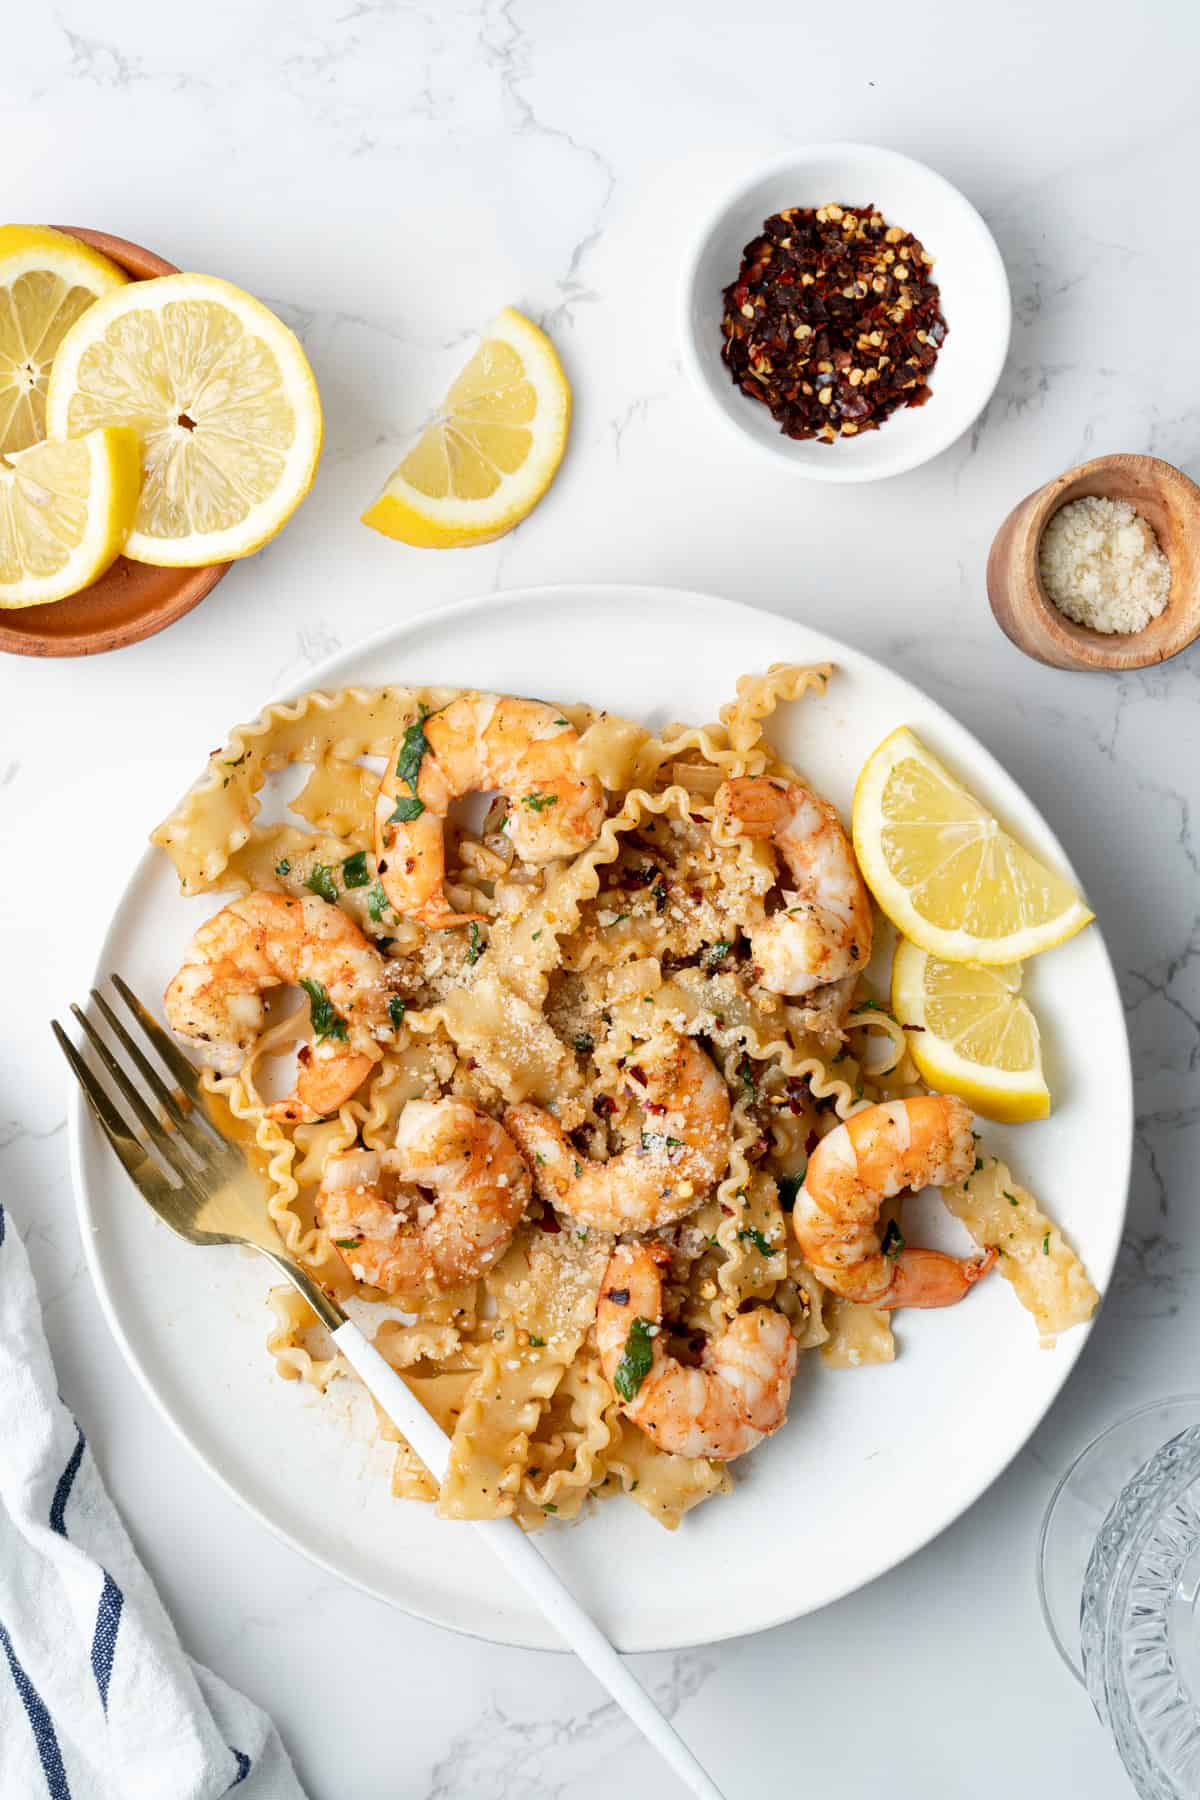 Shrimp scampi pasta in a white plate with lemons, chili flakes, and cheese on the side.